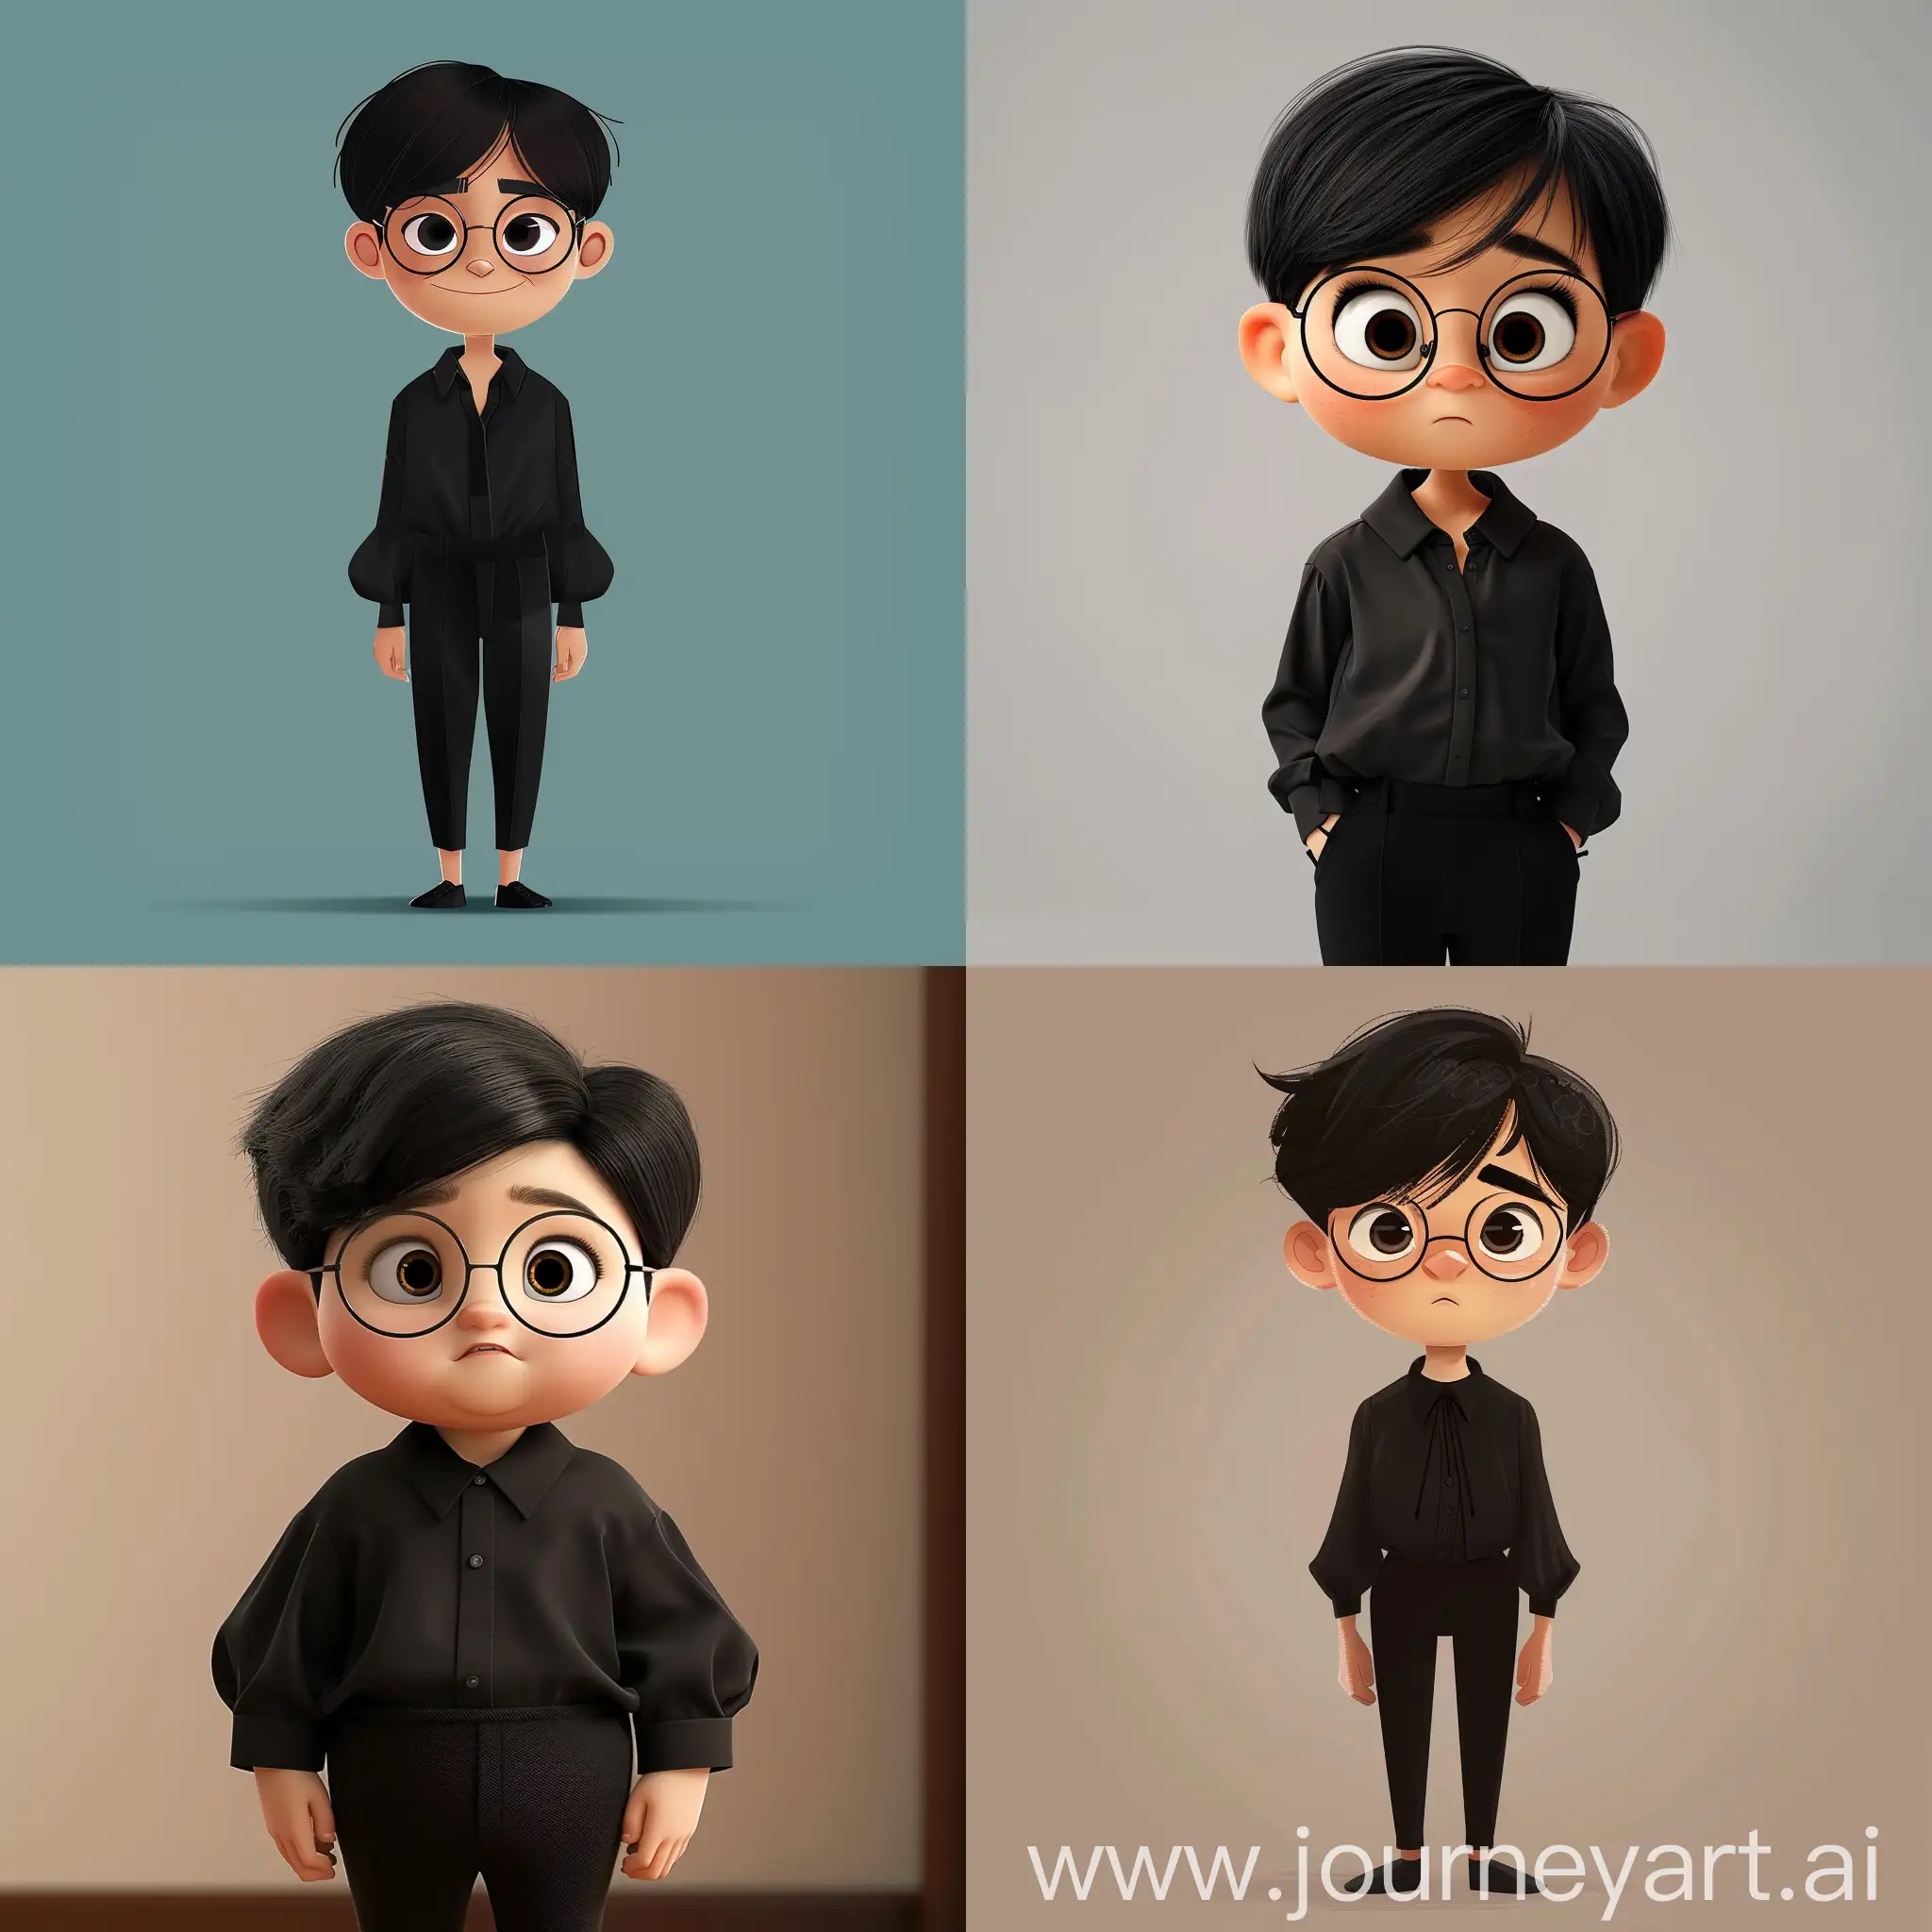 Classic-Disney-Style-Portrait-of-a-Boy-in-Black-Outfit